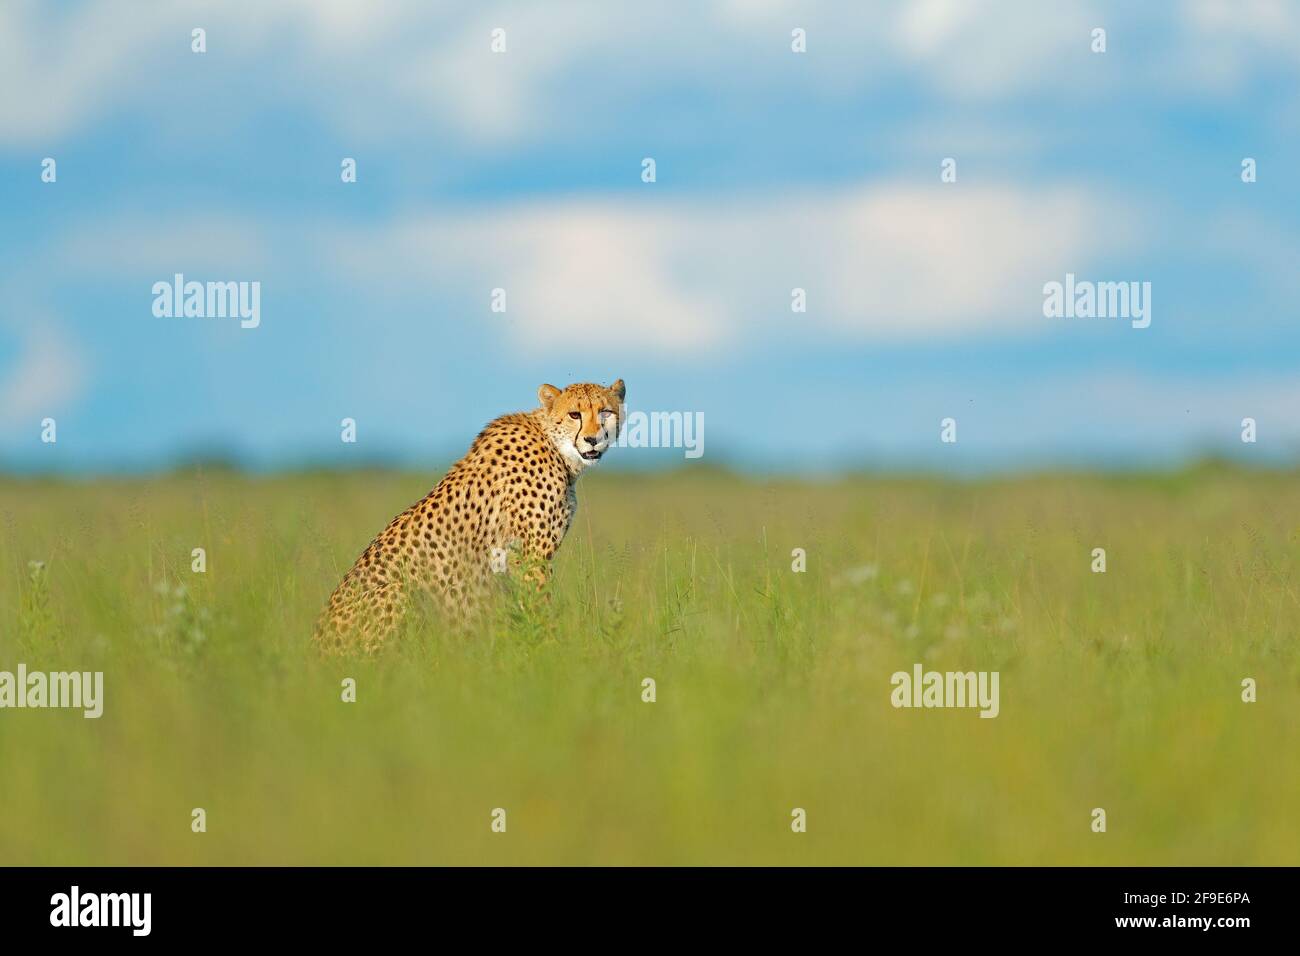 Cheetah, Acinonyx jubatus, walking wild cat. Fastest mammal on the land,  Botswana, Africa. Cheetah in grass, blue sky with clouds. Spotted wild cat  in Stock Photo - Alamy